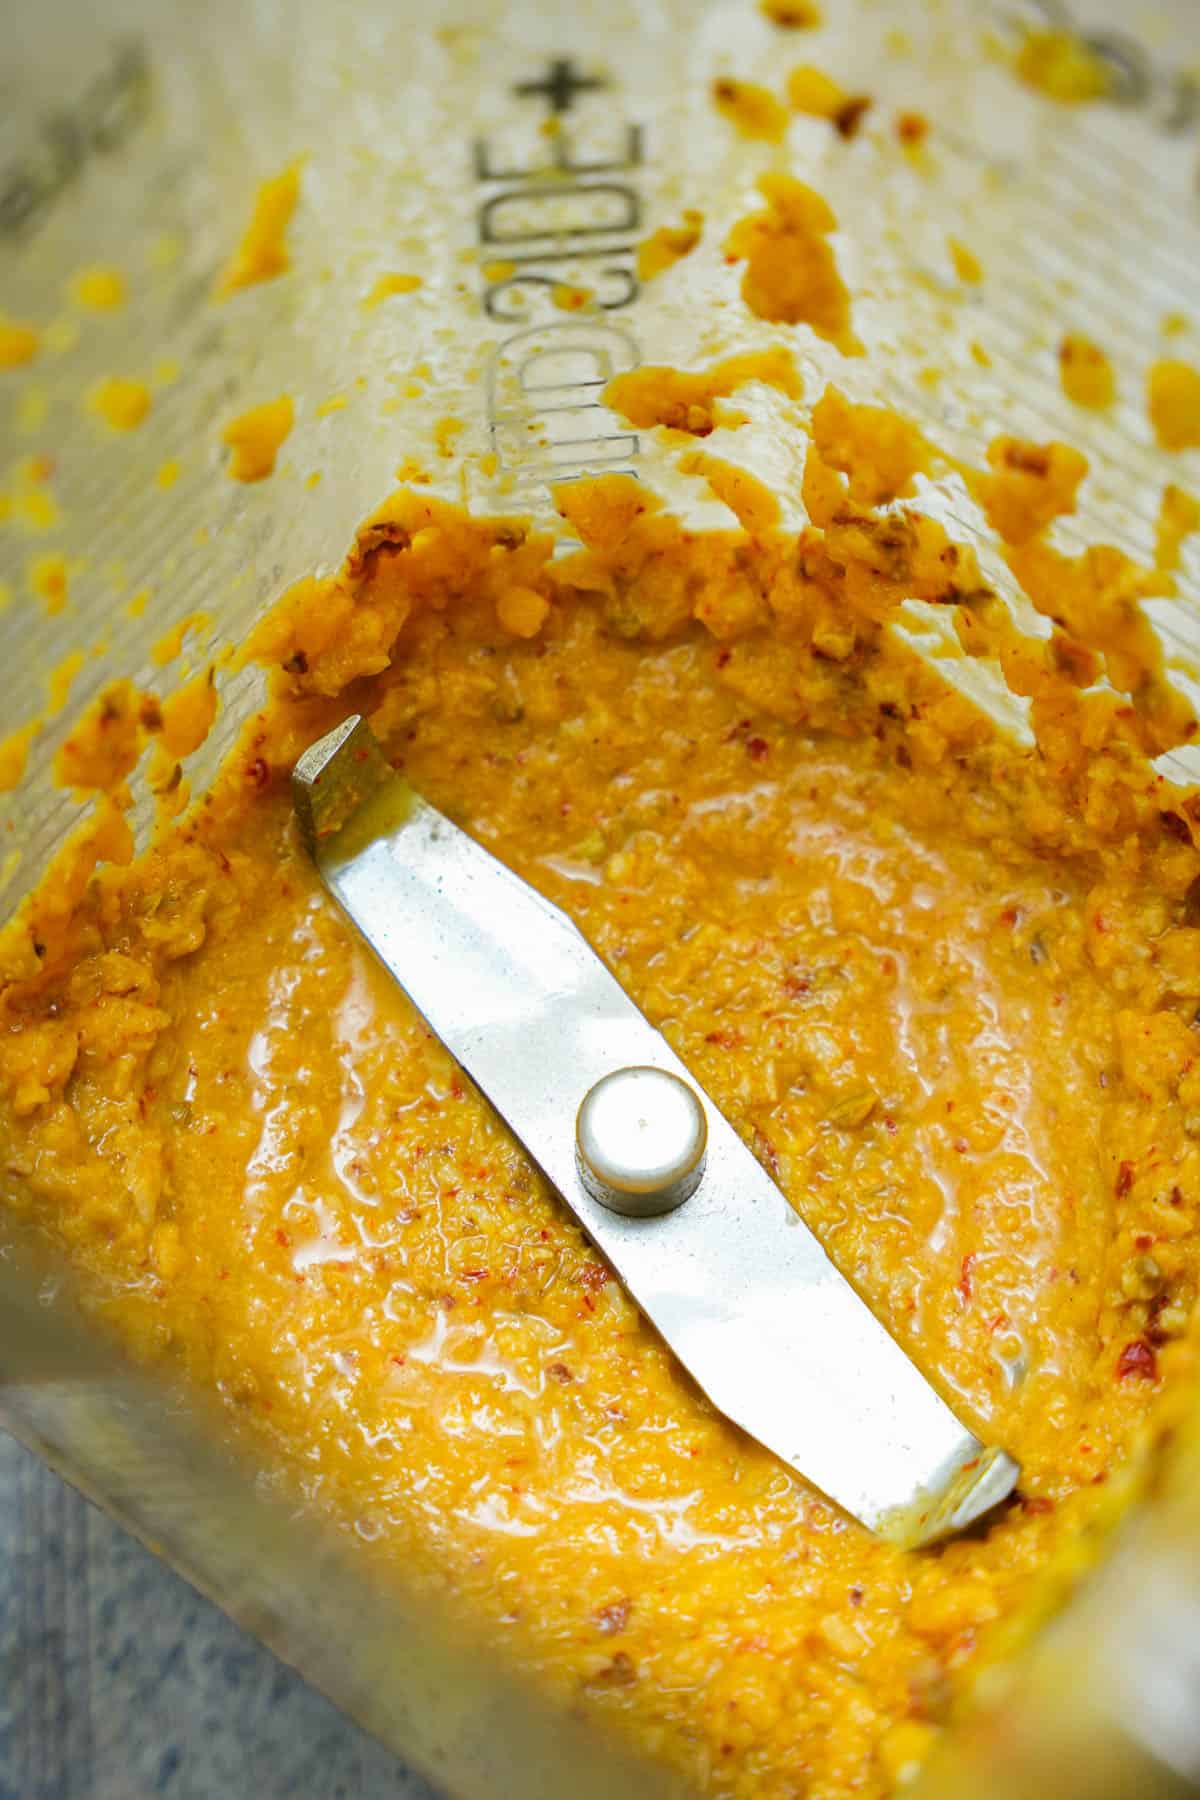 Curry paste is ground up in a blender.